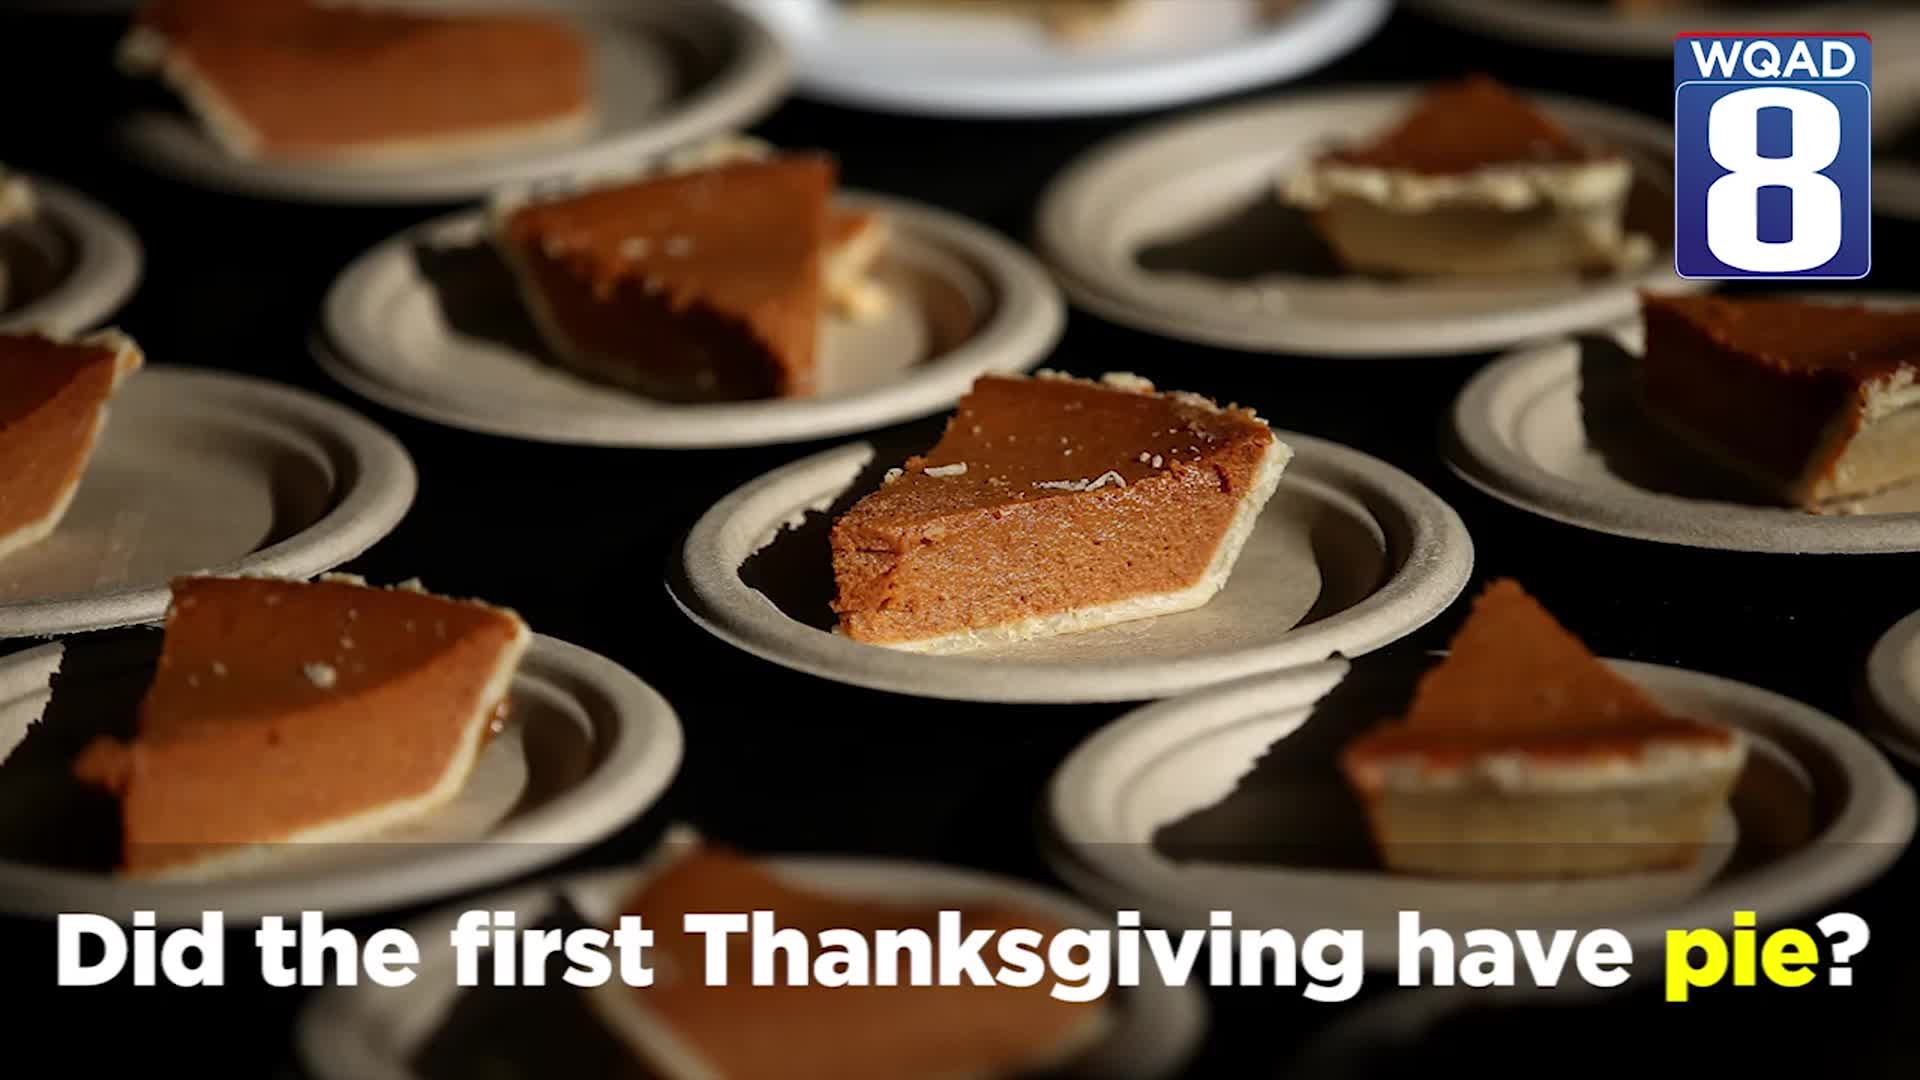 Some Thanksgiving foods may not be true to the first feast